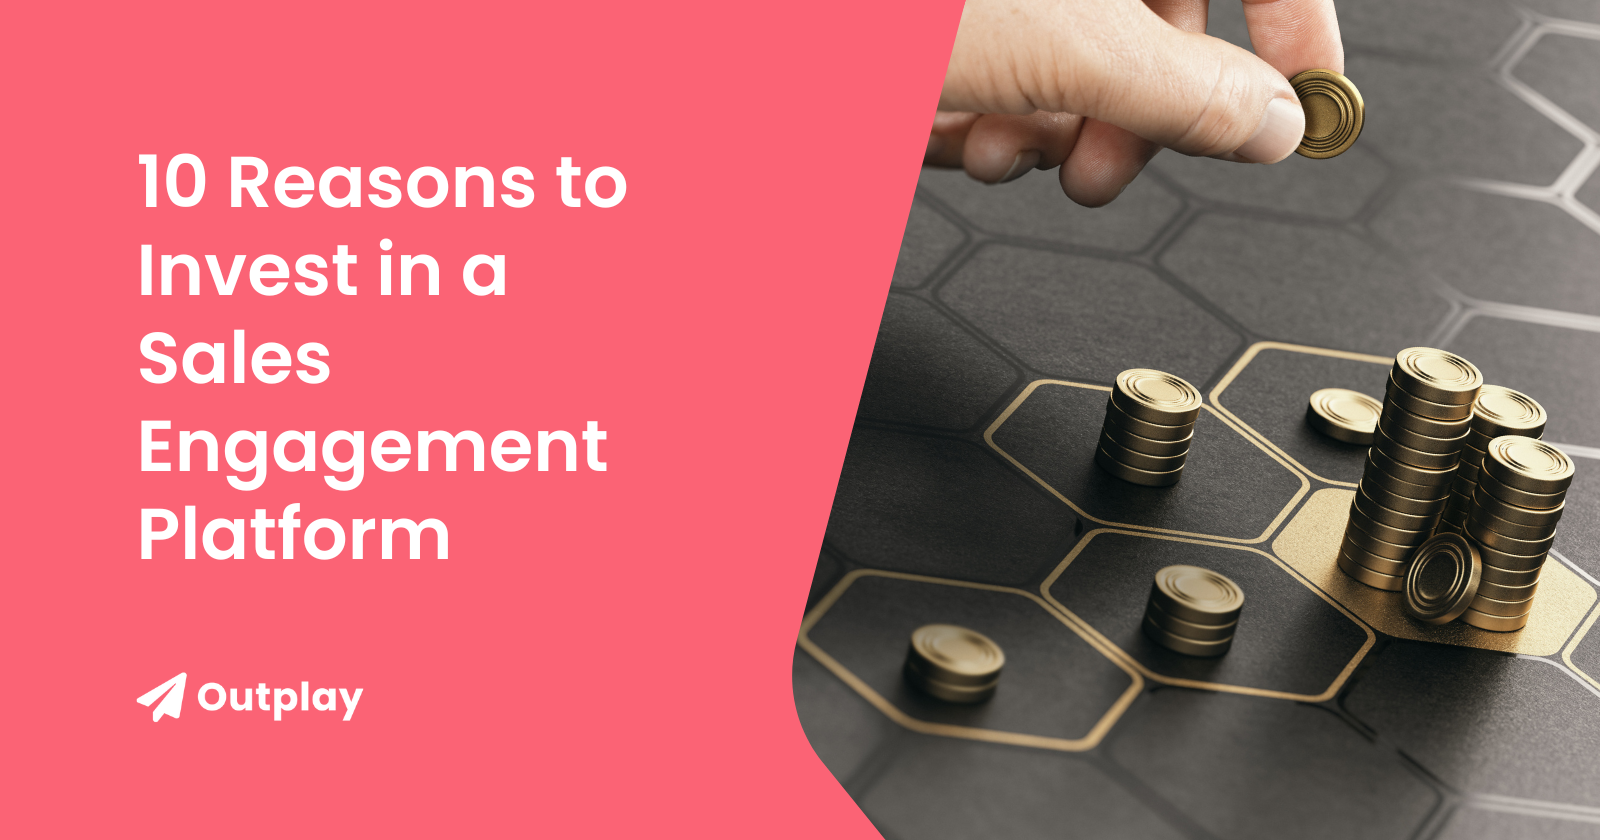 10 reasons to invest in a sales engagement platform